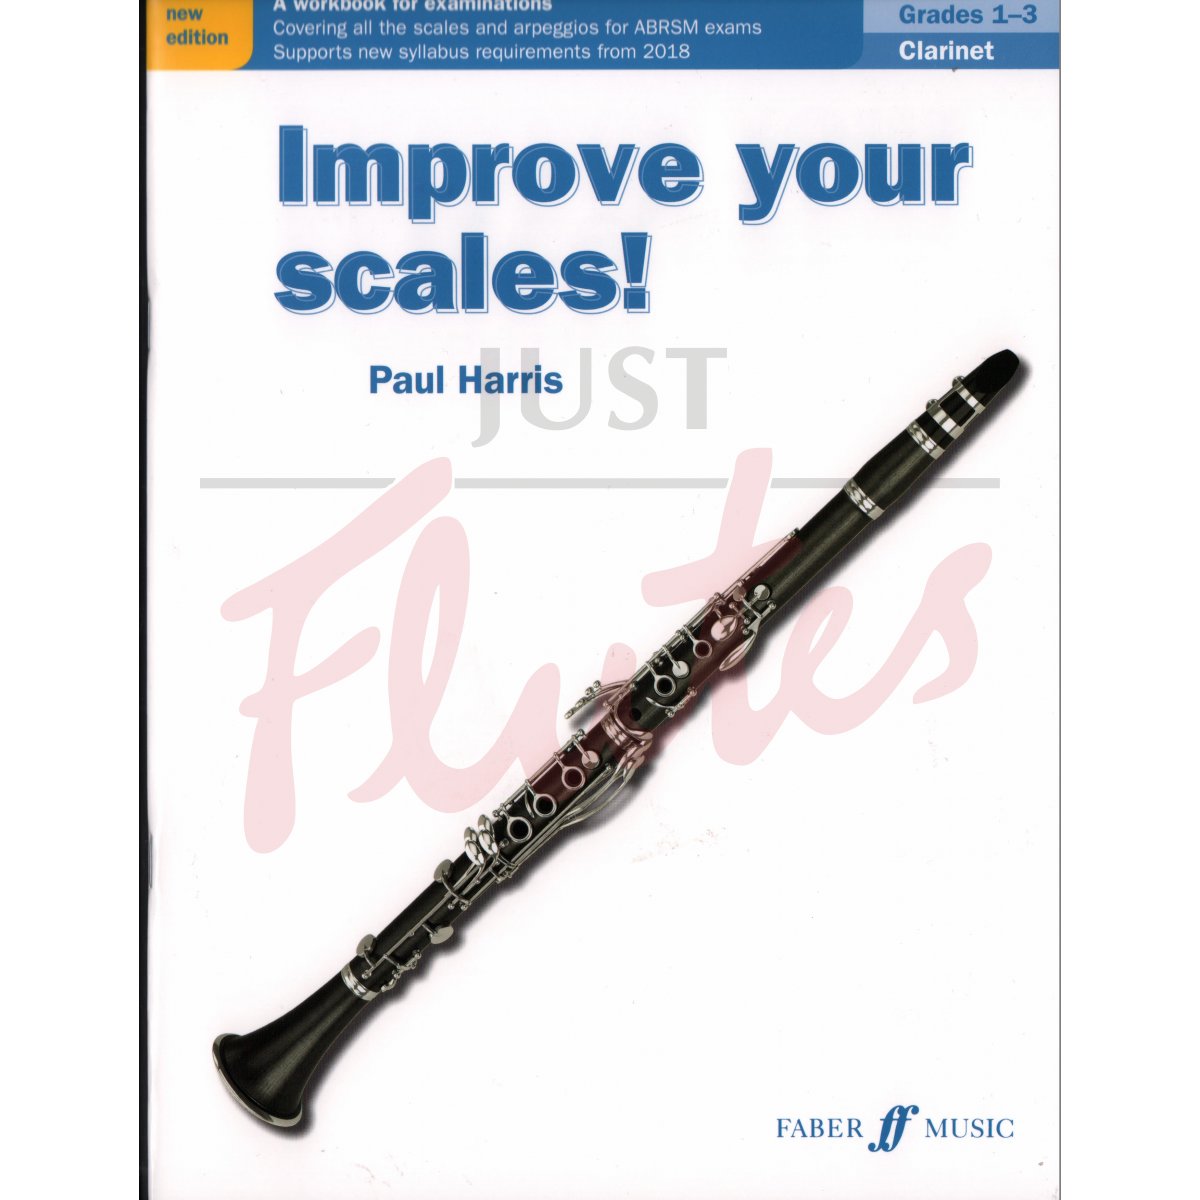 Improve Your Scales! Grades 1-3 Clarinet for ABRSM from 2018